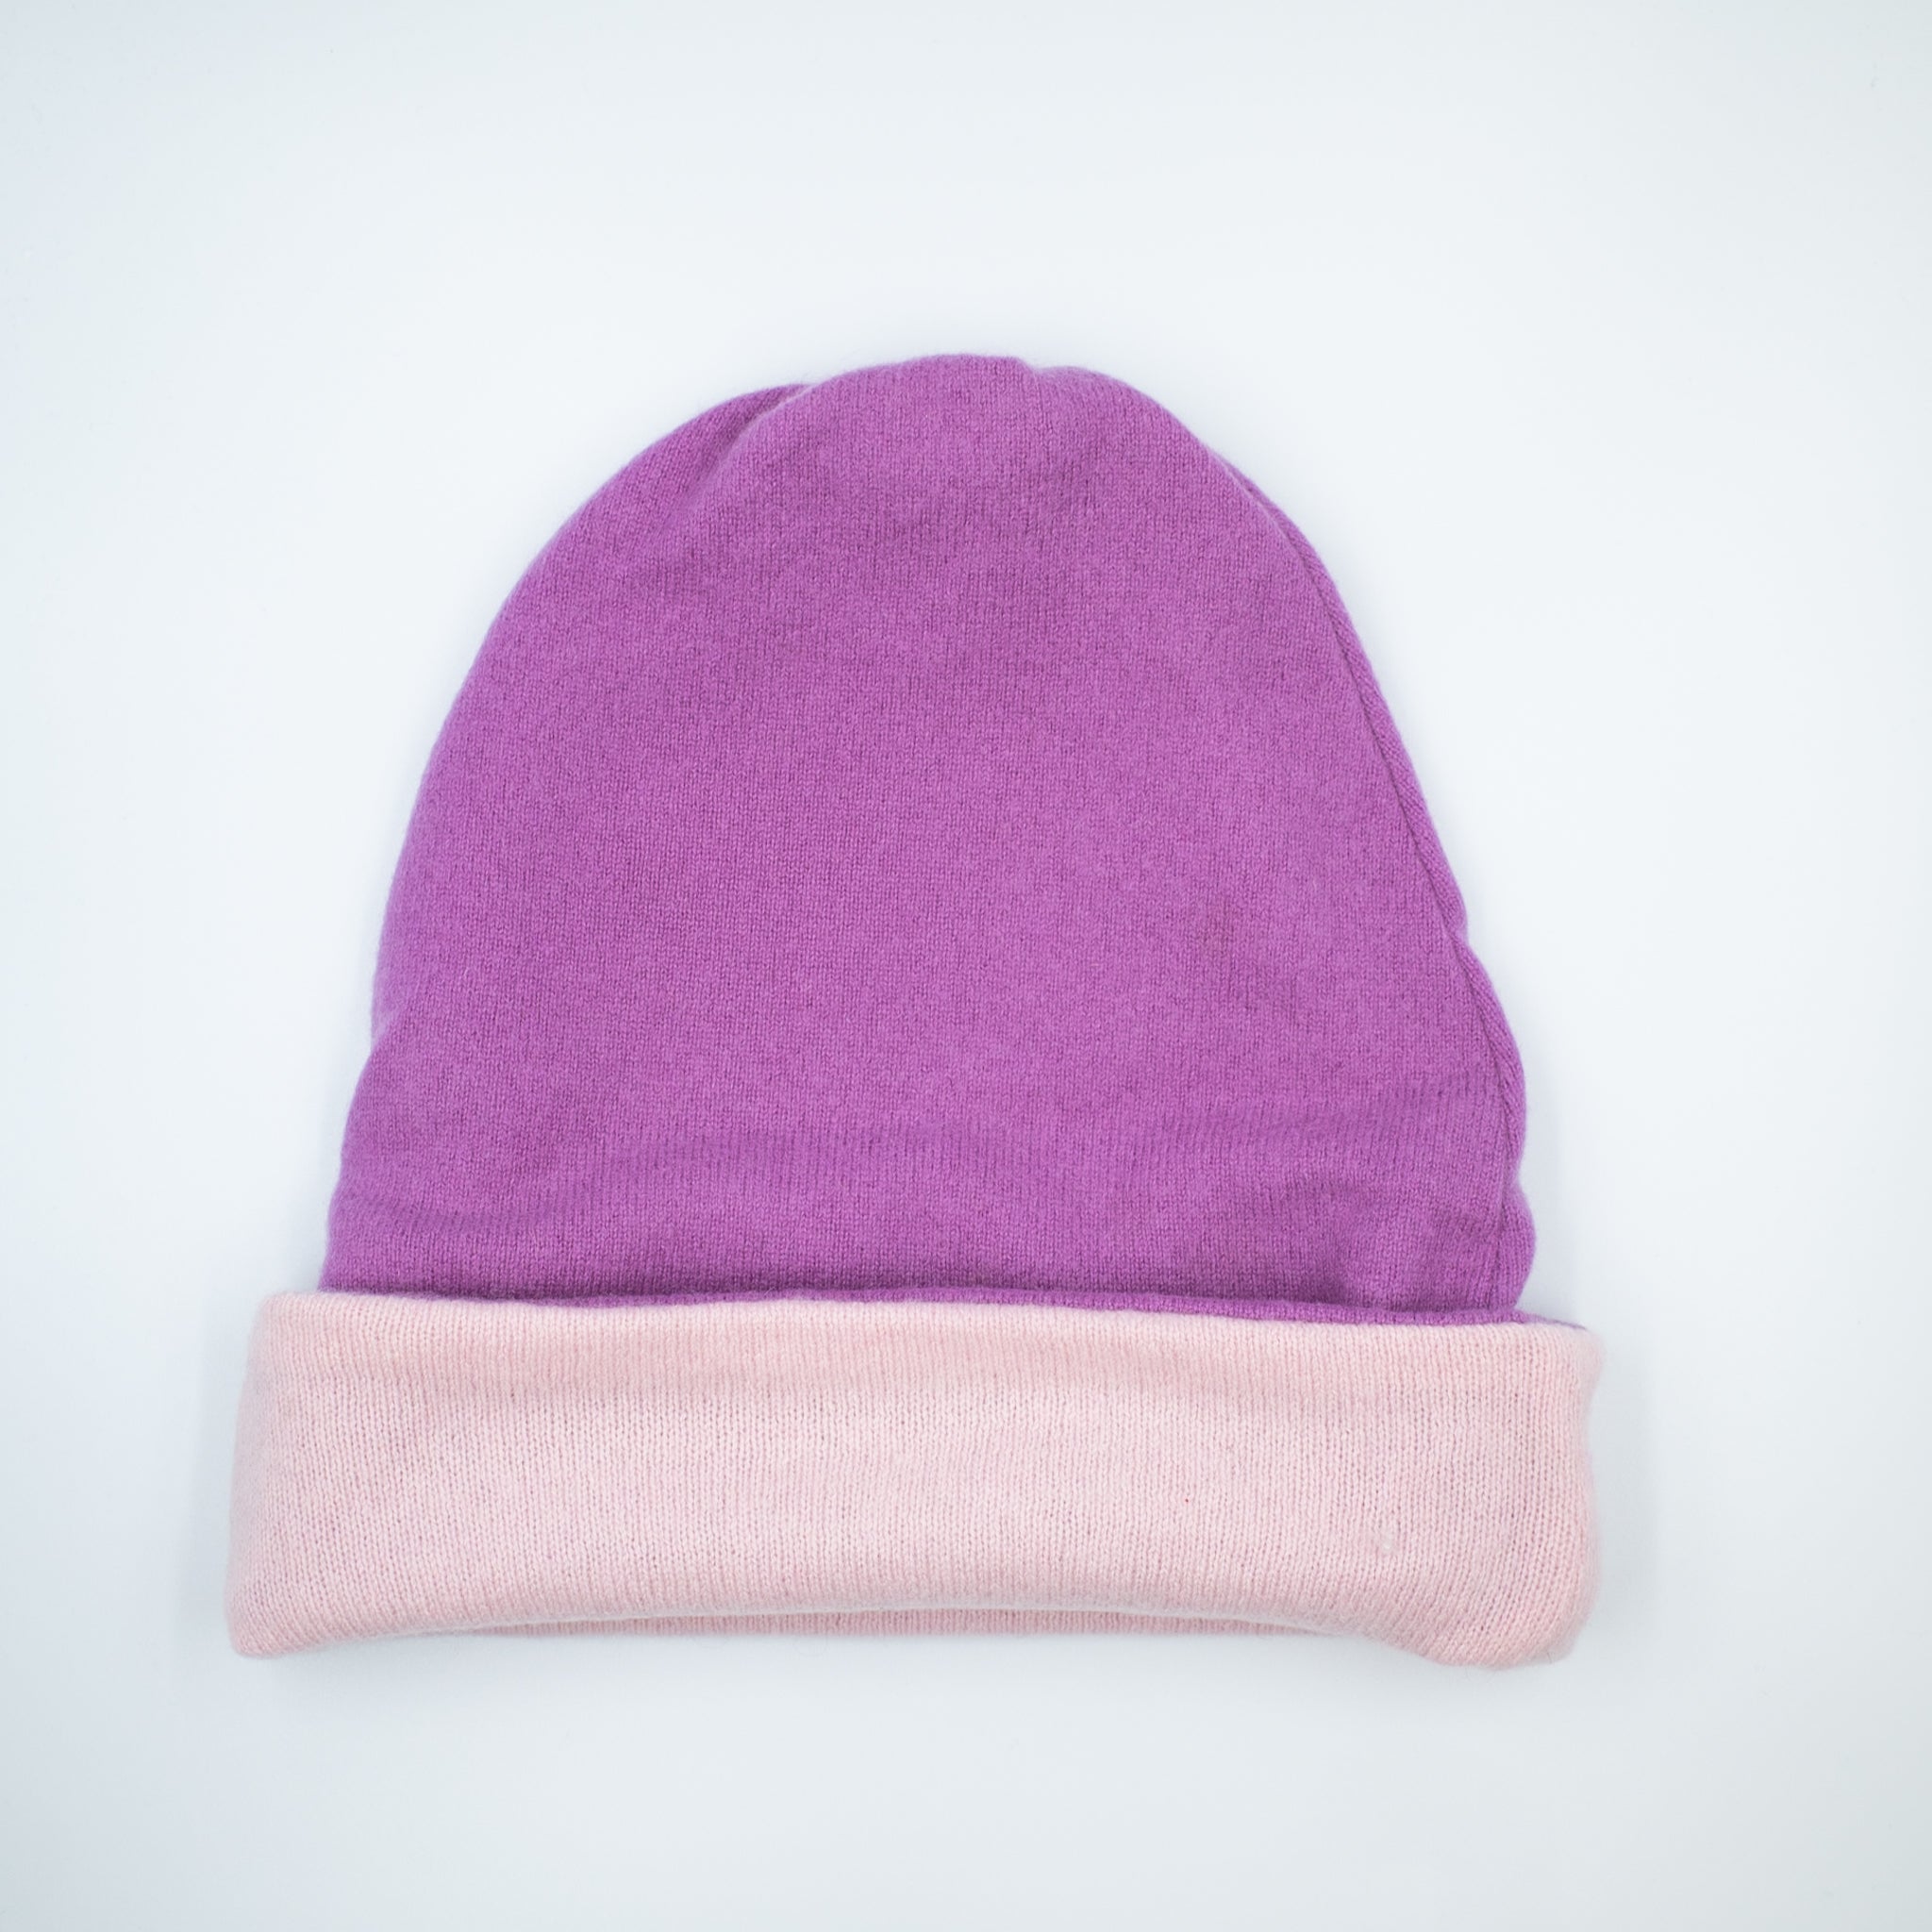 Bright Mauve and Baby Pink Reversible Slouchy Beanie Hat